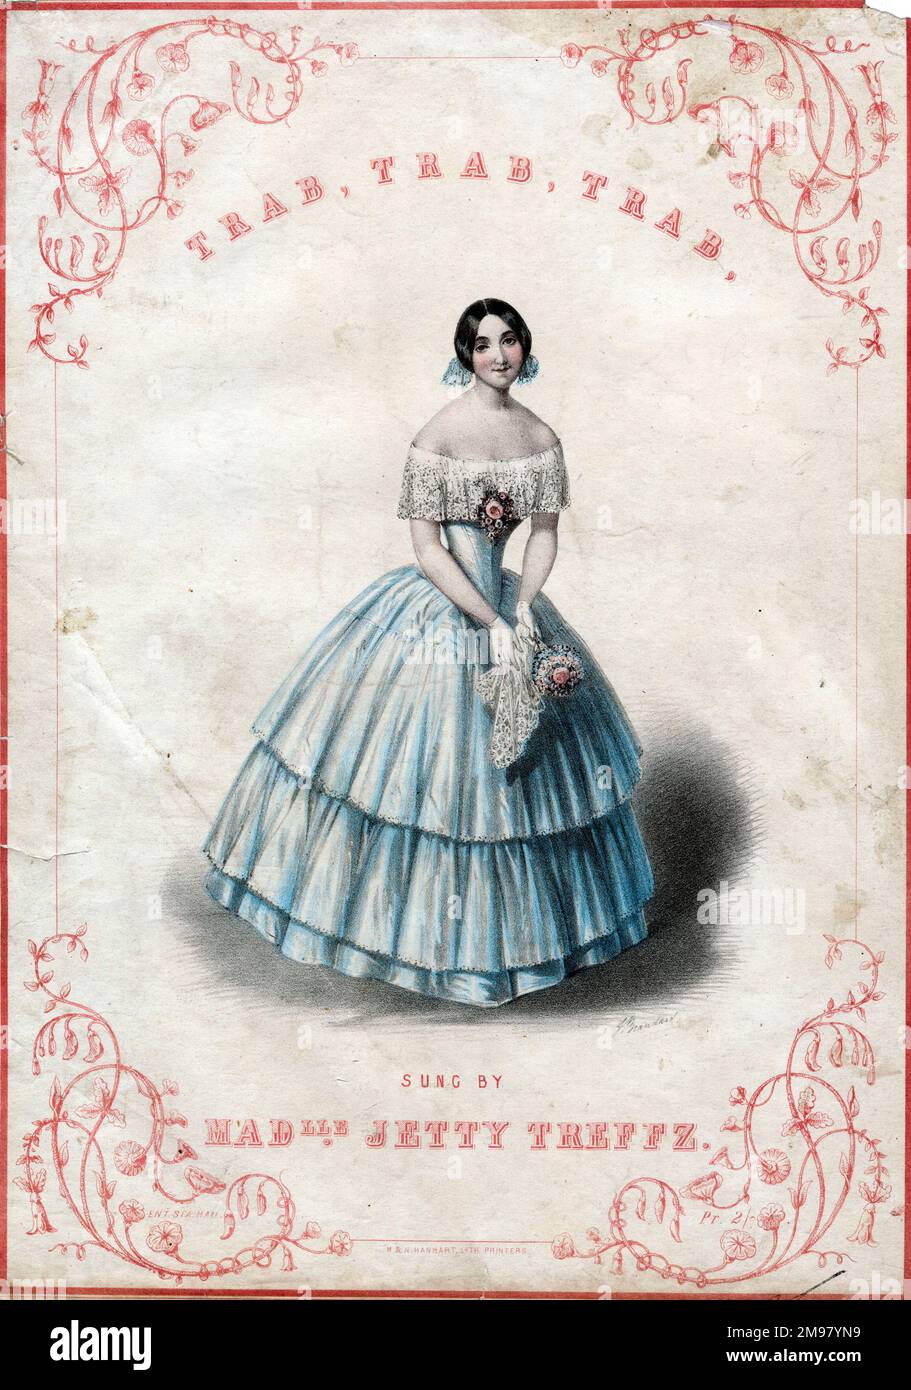 Music cover, Trab Trab Trab, One Day While Gently Riding, sung by Mademoiselle Henrietta (Jetty) Treffz (1818-1878). Stock Photo